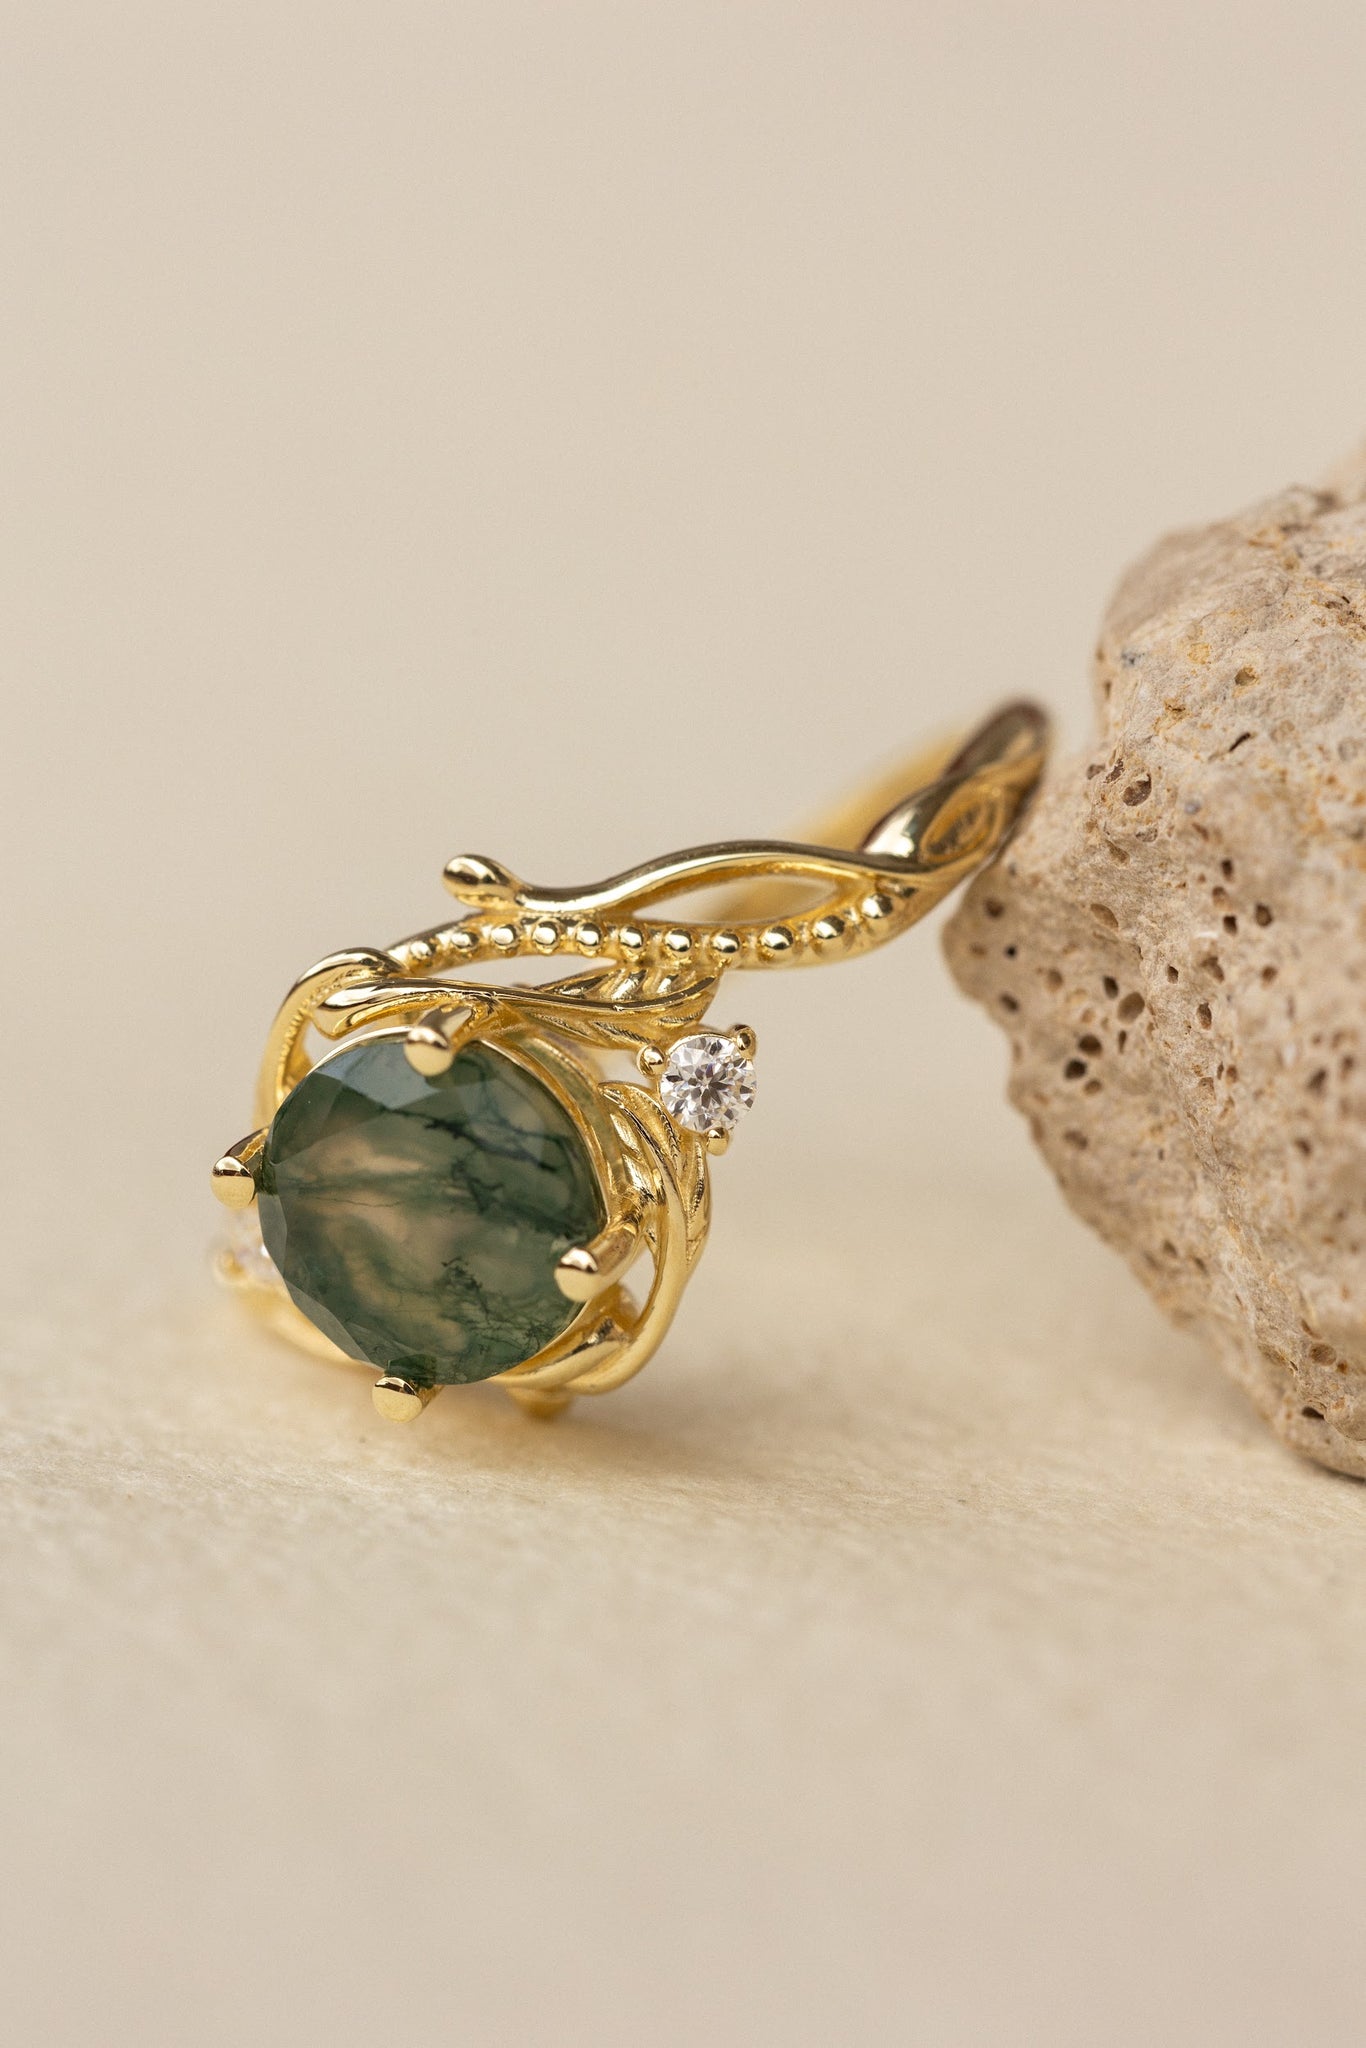 Round moss agate engagement ring with accent diamonds, nature themed proposal ring with diamonds  / Undina - Eden Garden Jewelry™